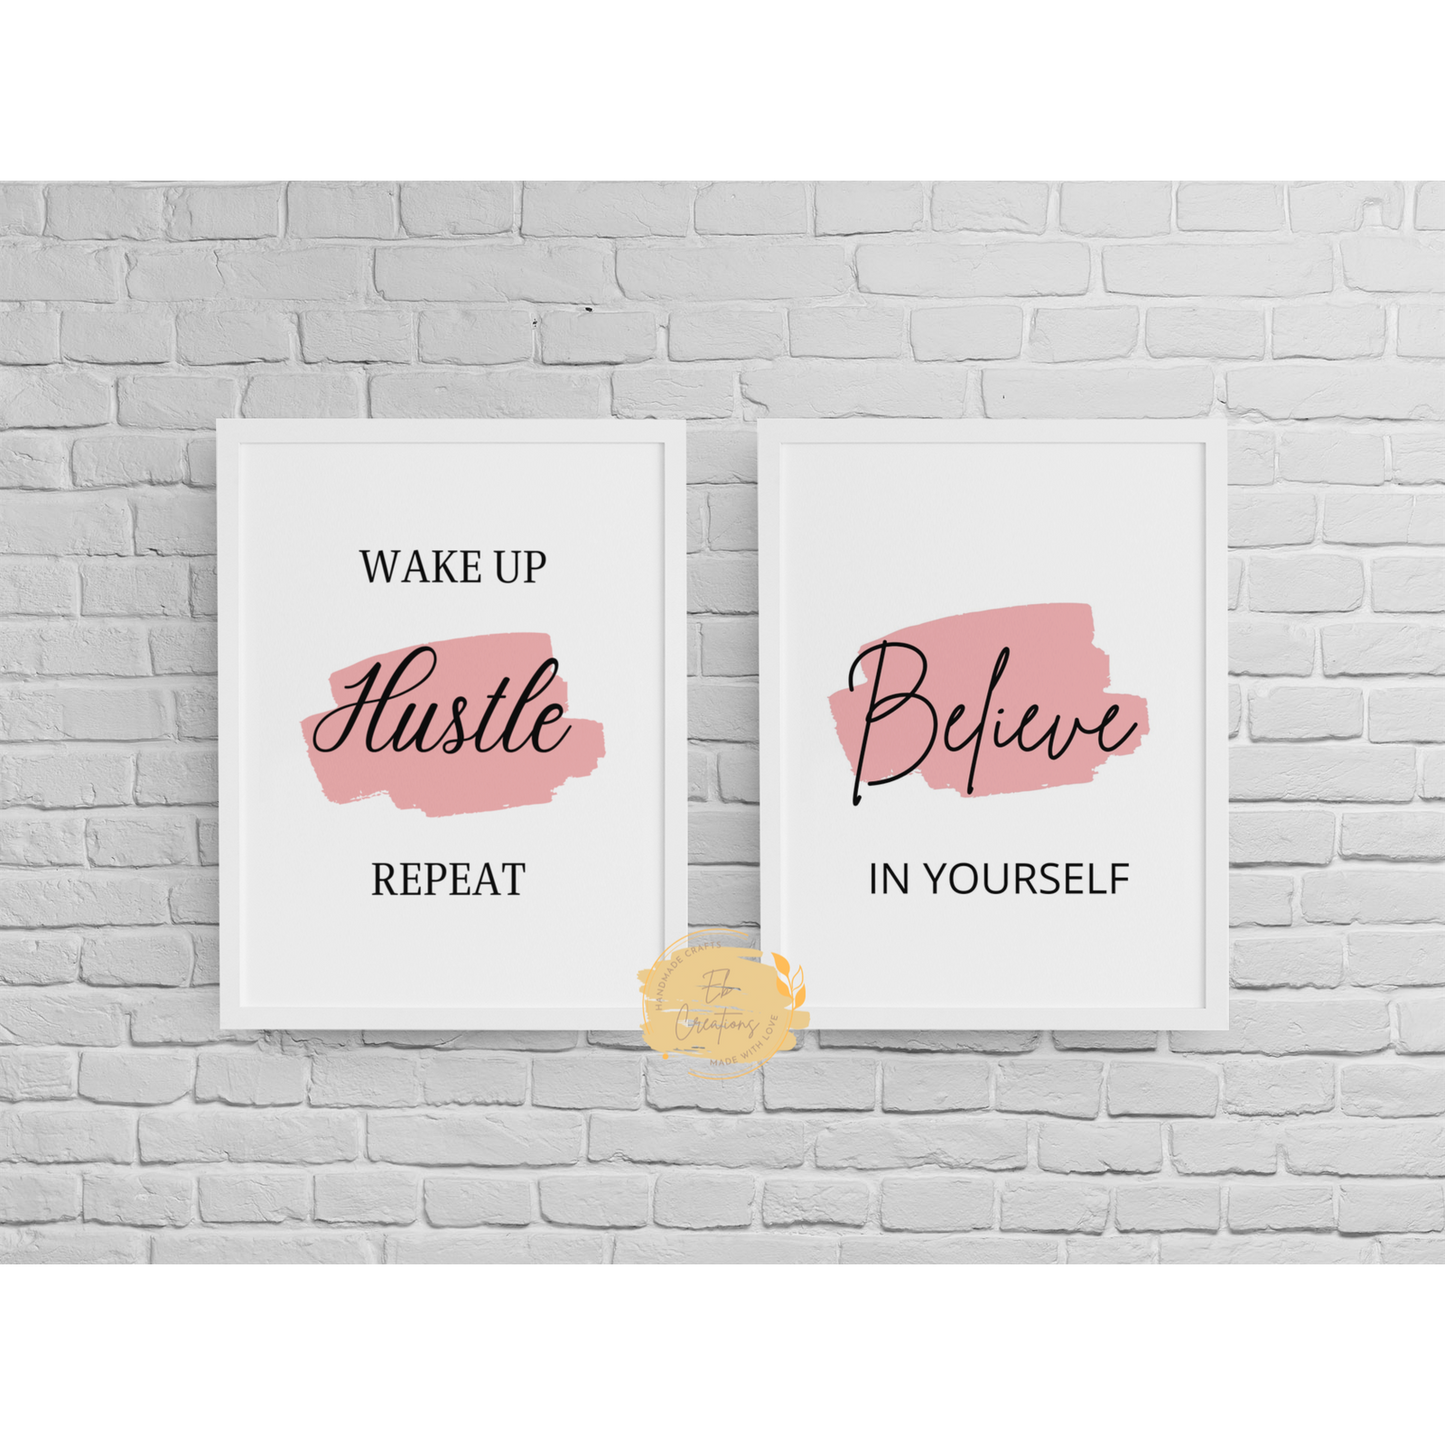 Sleep Hustle Repeat & Believe In Yourself | Wall Art | Wall Decor | Motivational Quotes - Eb Creations Posters, Prints, & Visual Artwork Sleep Hustle Repeat & Believe In Yourself | Wall Art | Wall Decor | Motivational Quotes